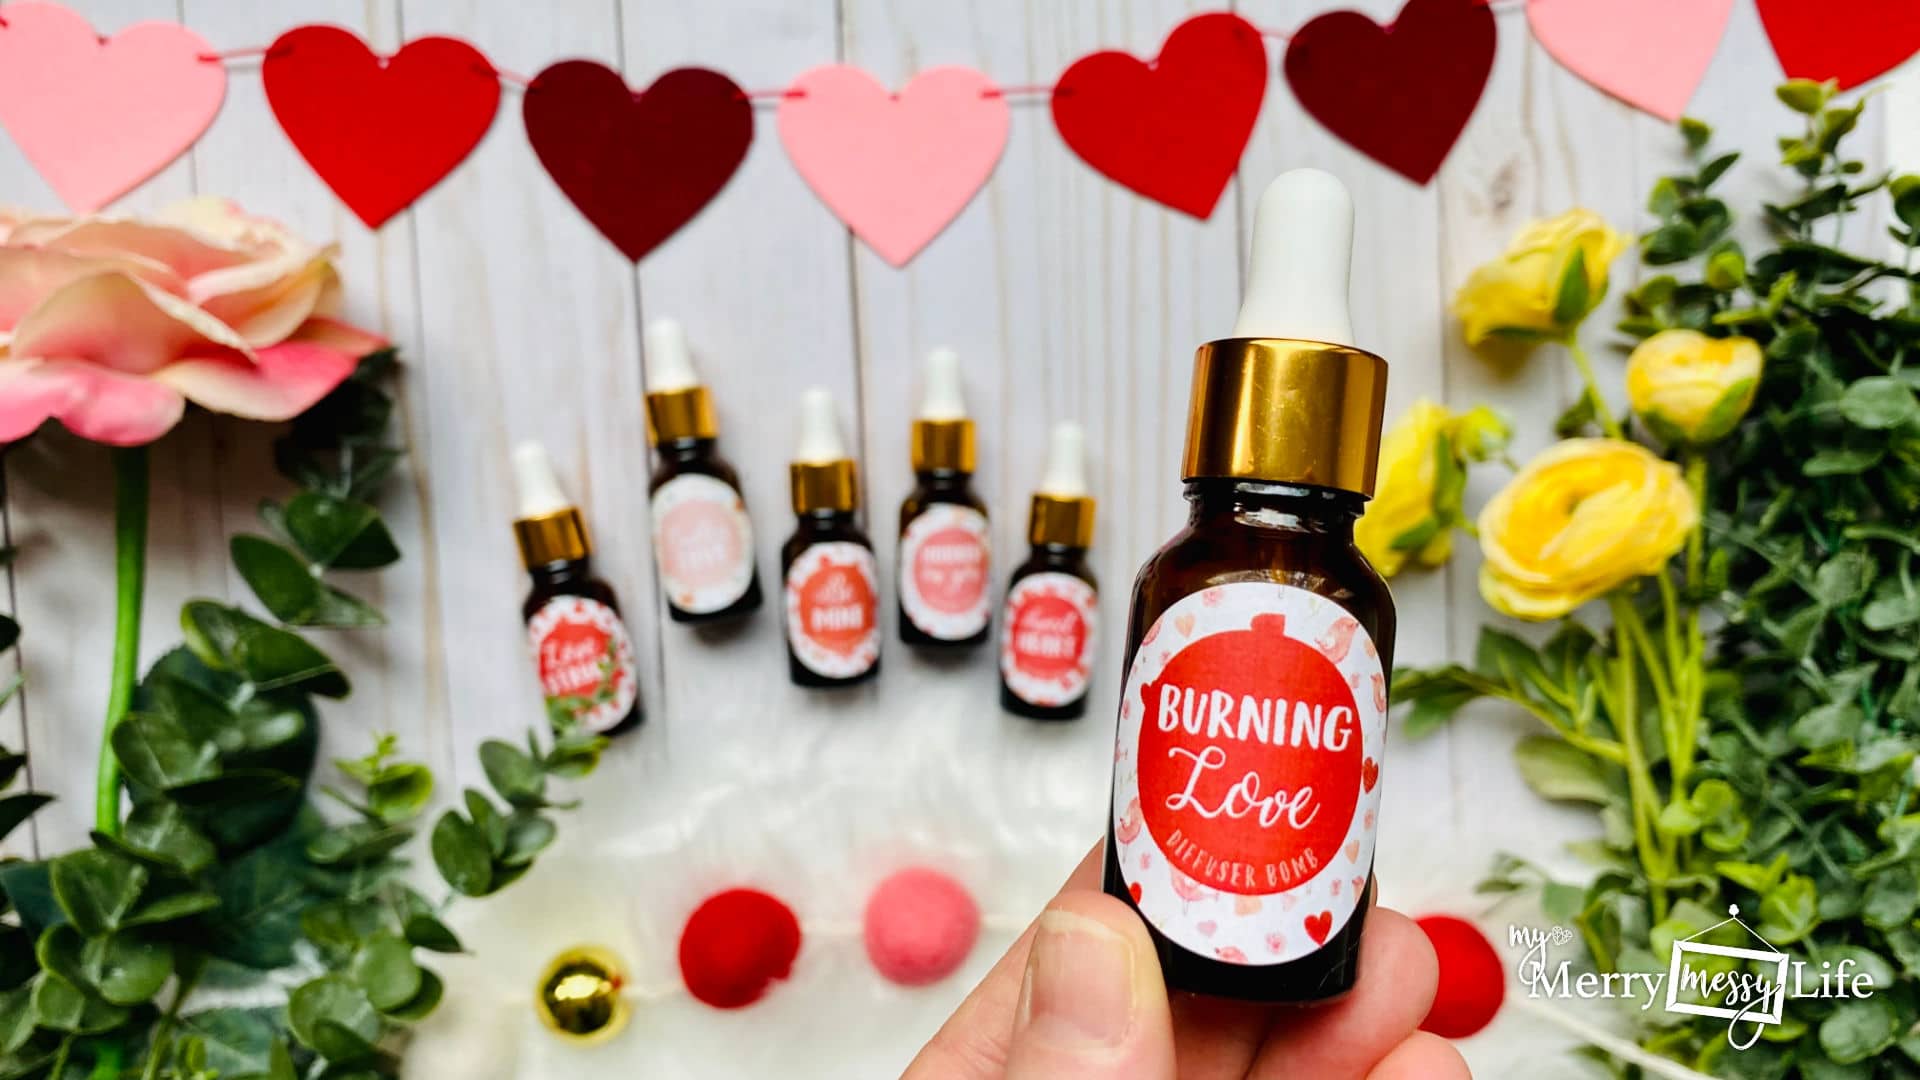 Burning Love Valentine's Day Essential Oil Diffuser Bomb Recipe - make your own customizable diffuser blends with these recipe